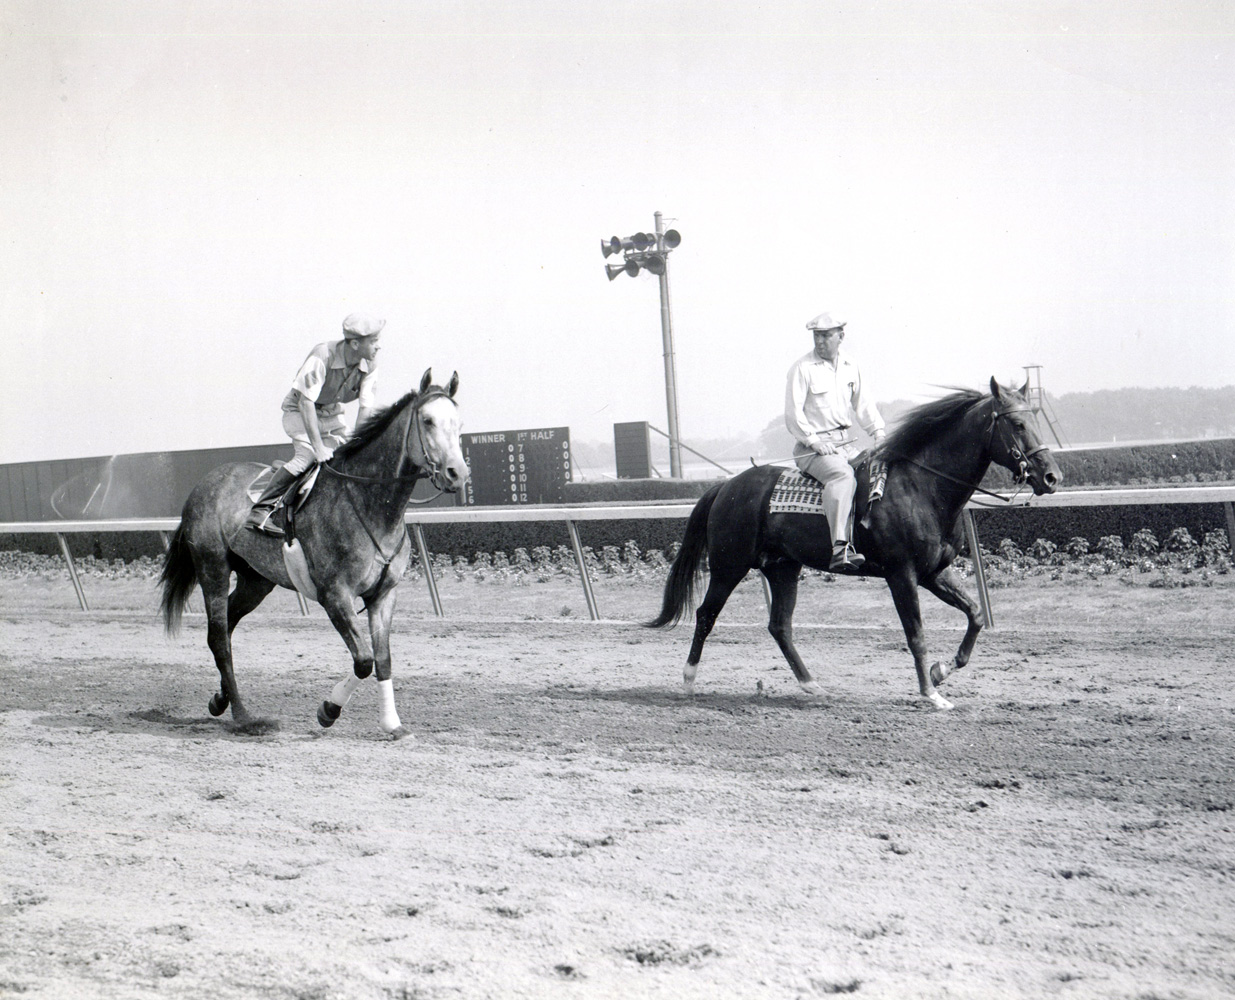 William C. Winfrey on a pony (on right) with Native Dancer and exercise rider B. Everson on the track (Museum Collection)